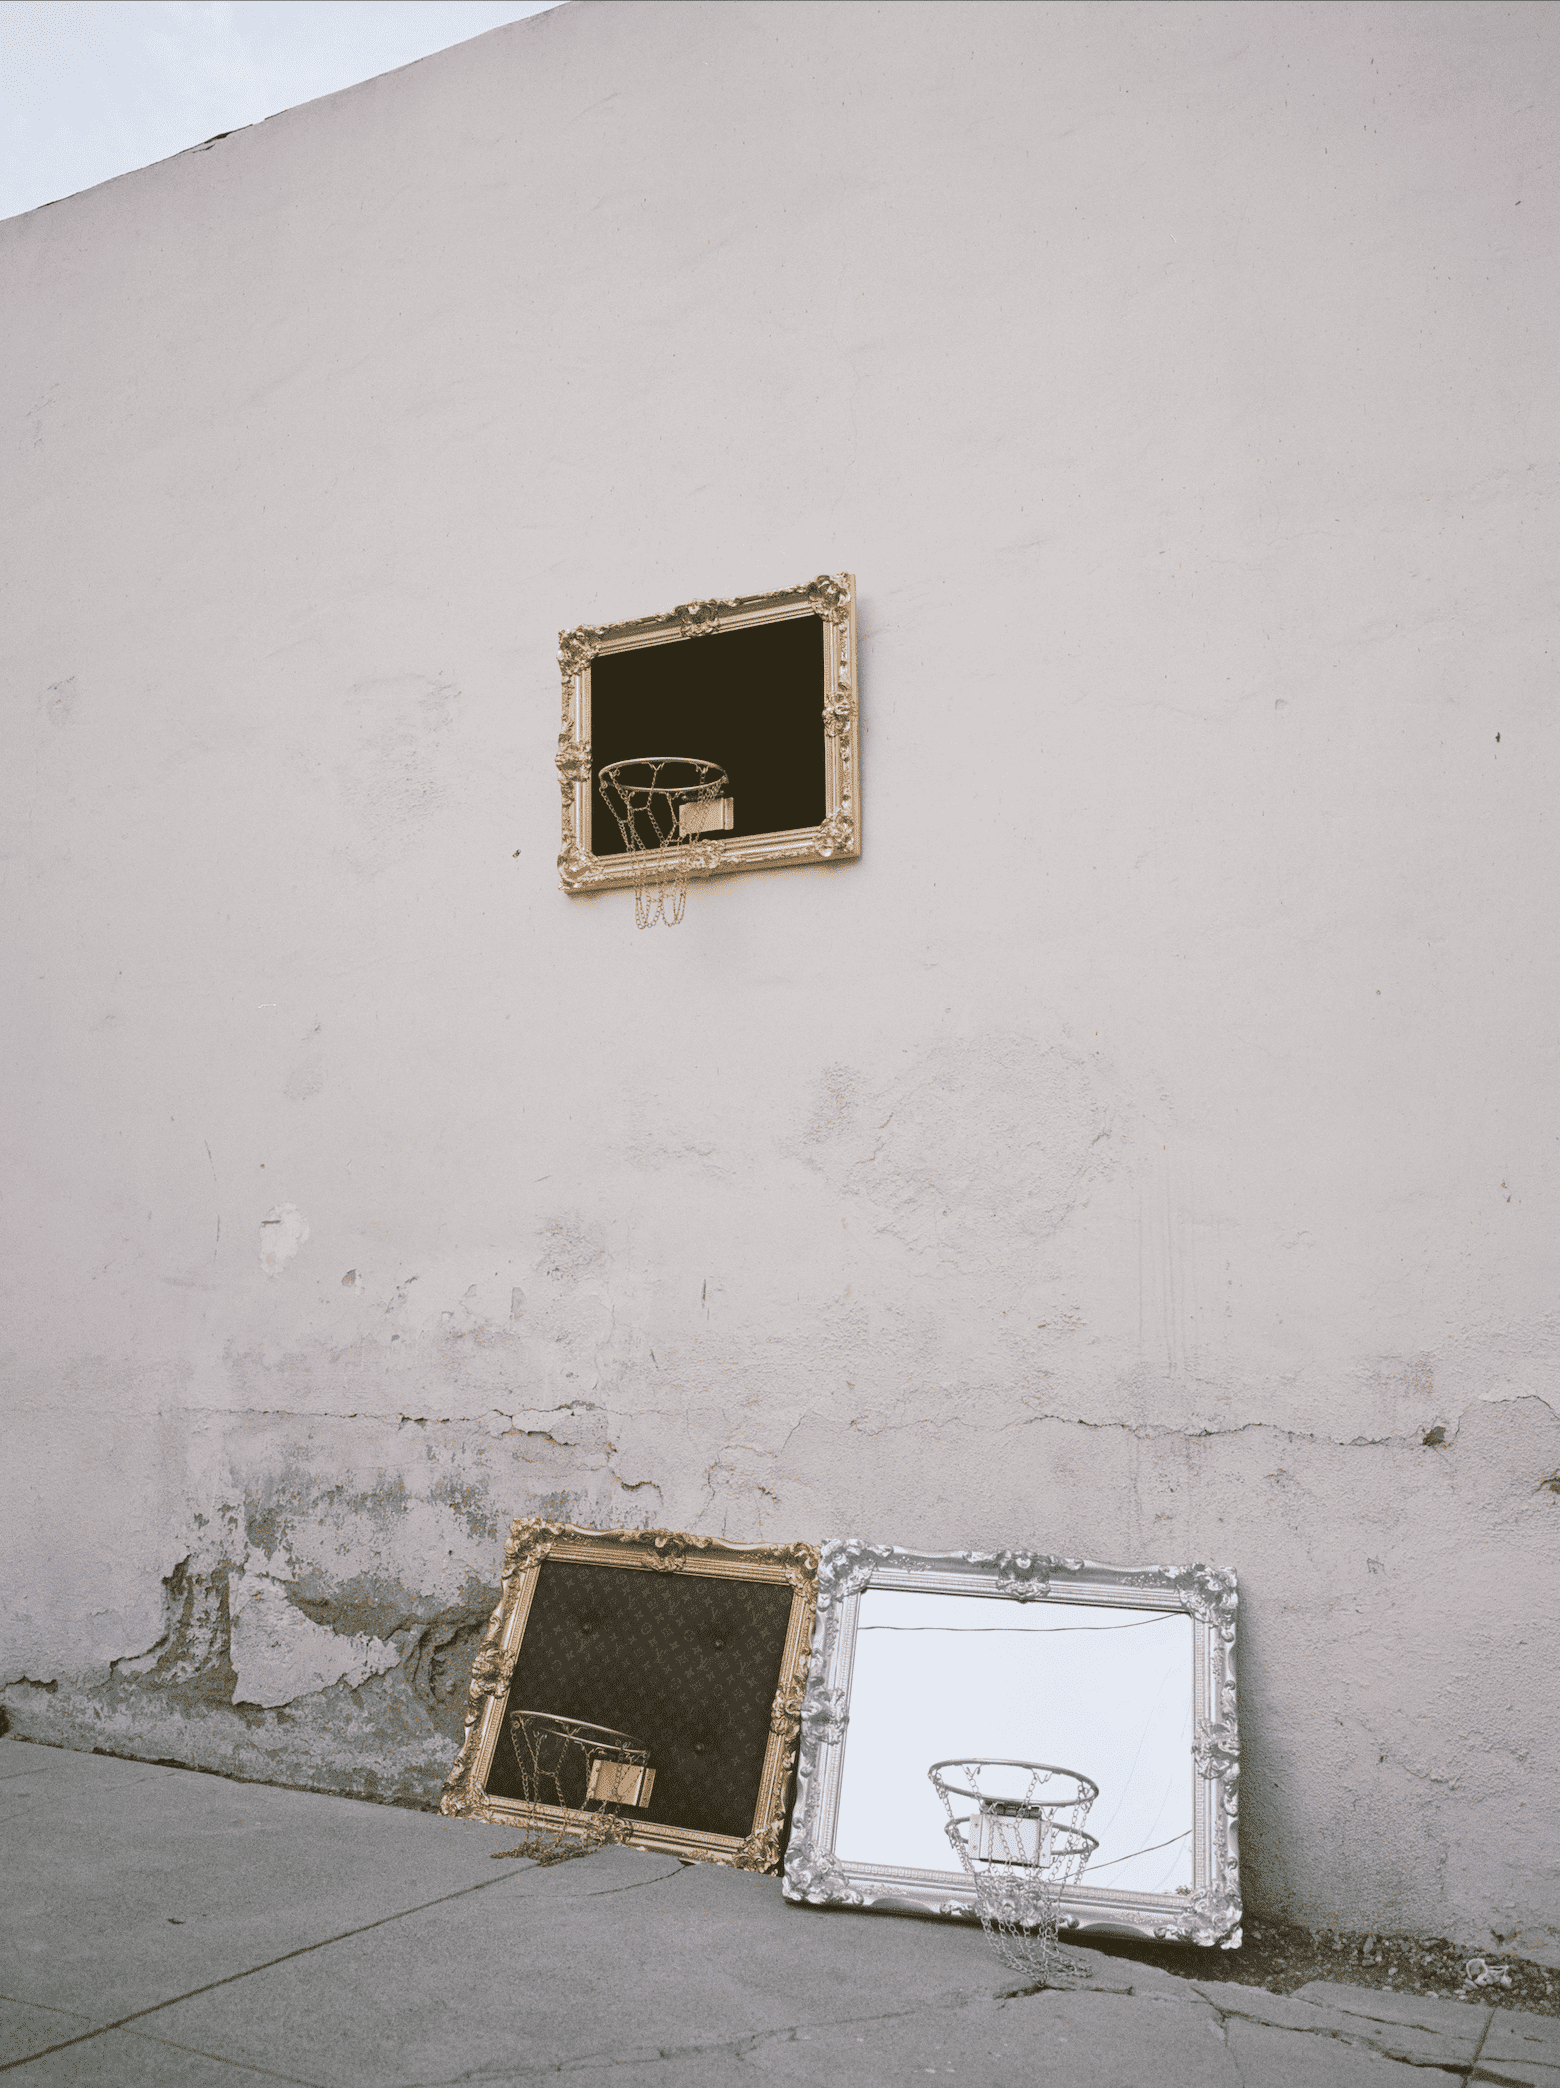 A picture of a basketball hoop on a wall.